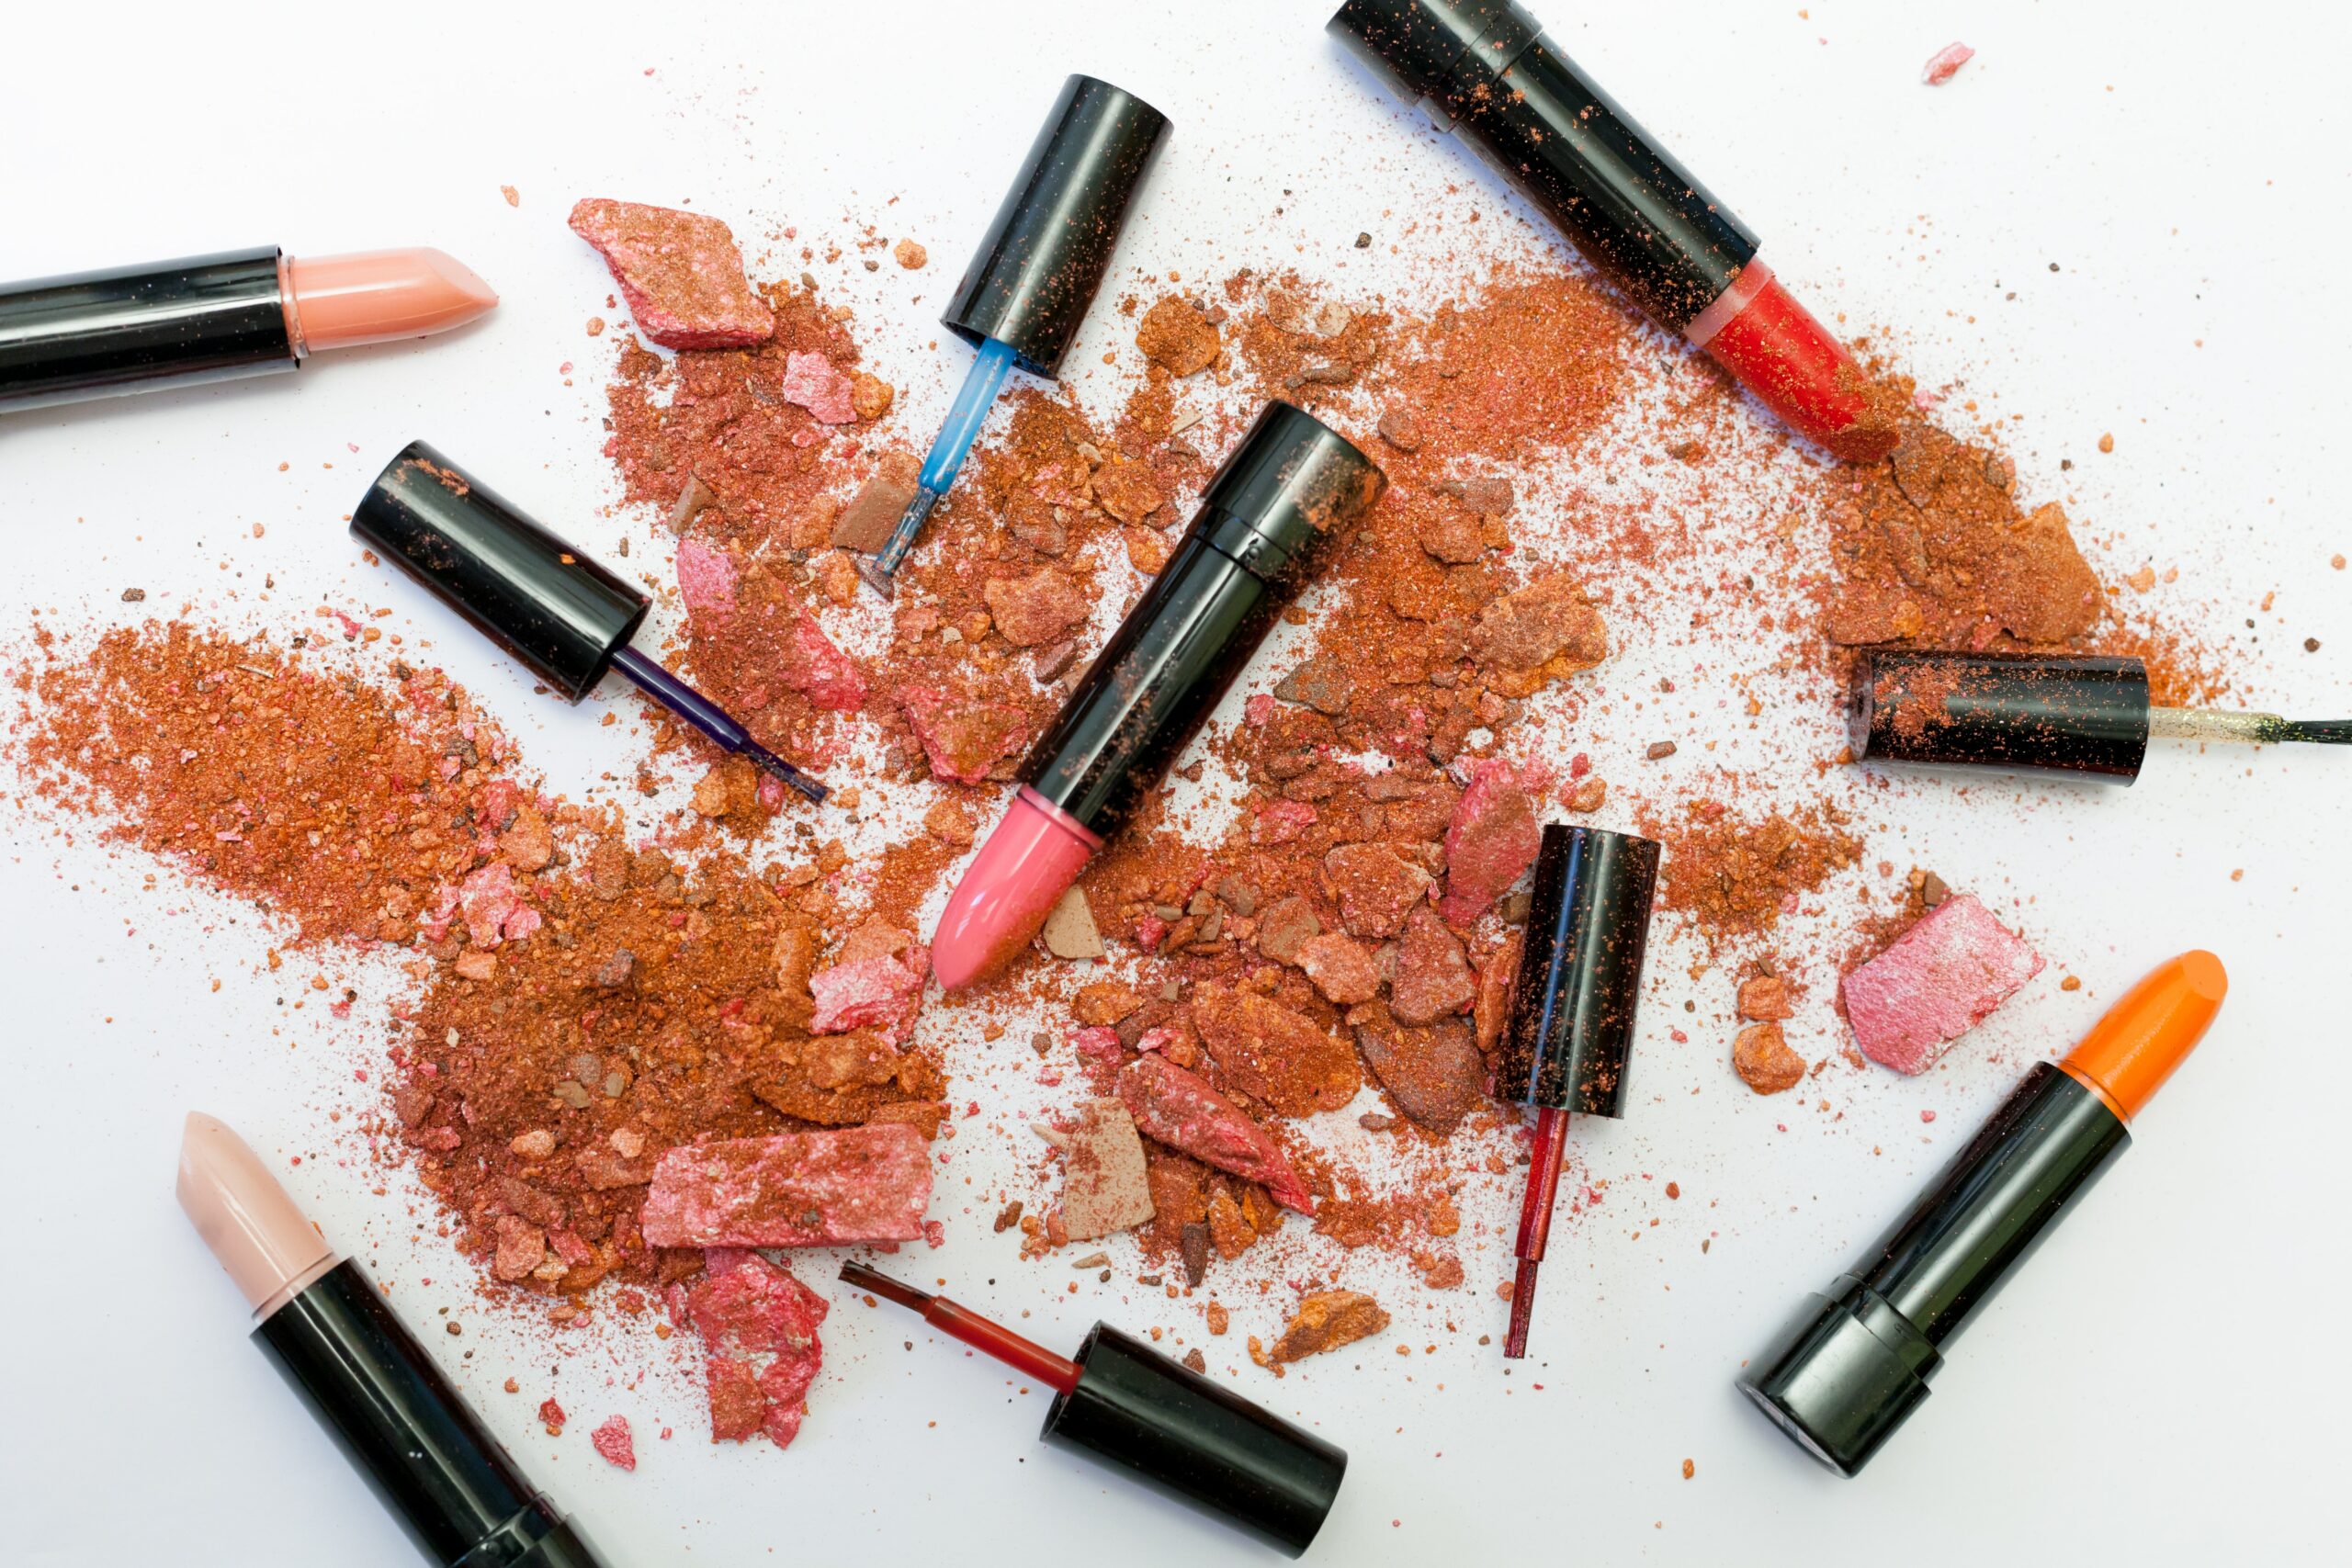 ‘Forever chemicals’ could be lurking in your lipstick